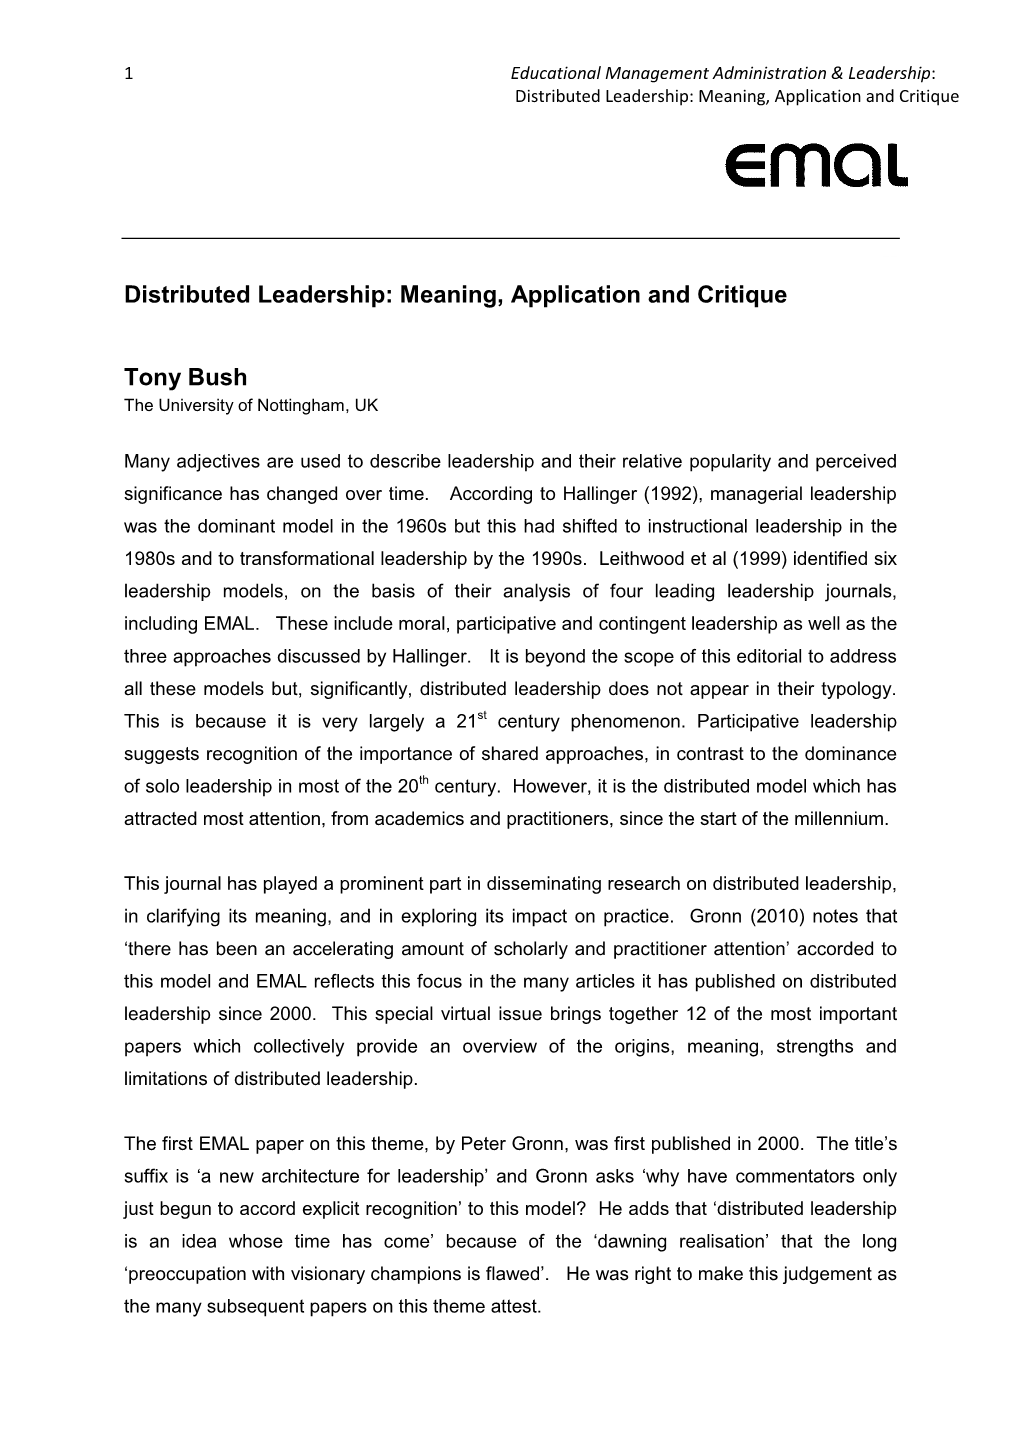 Distributed Leadership: Meaning, Application and Critique